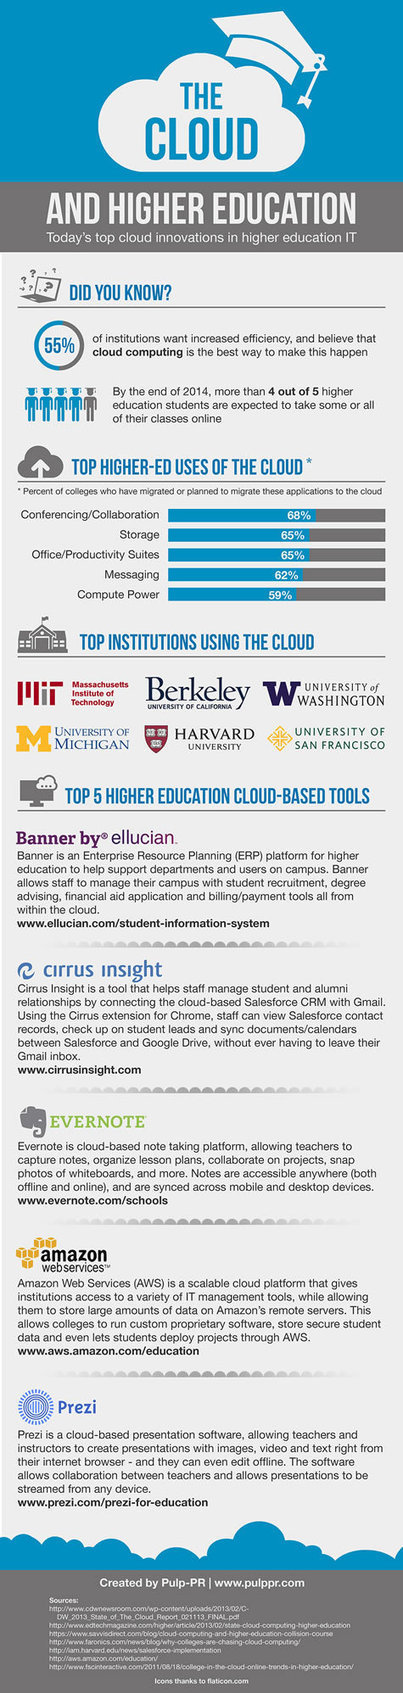 The Cloud and Higher Education: New twist for the Ivory Tower | Distance Learning, mLearning, Digital Education, Technology | Scoop.it